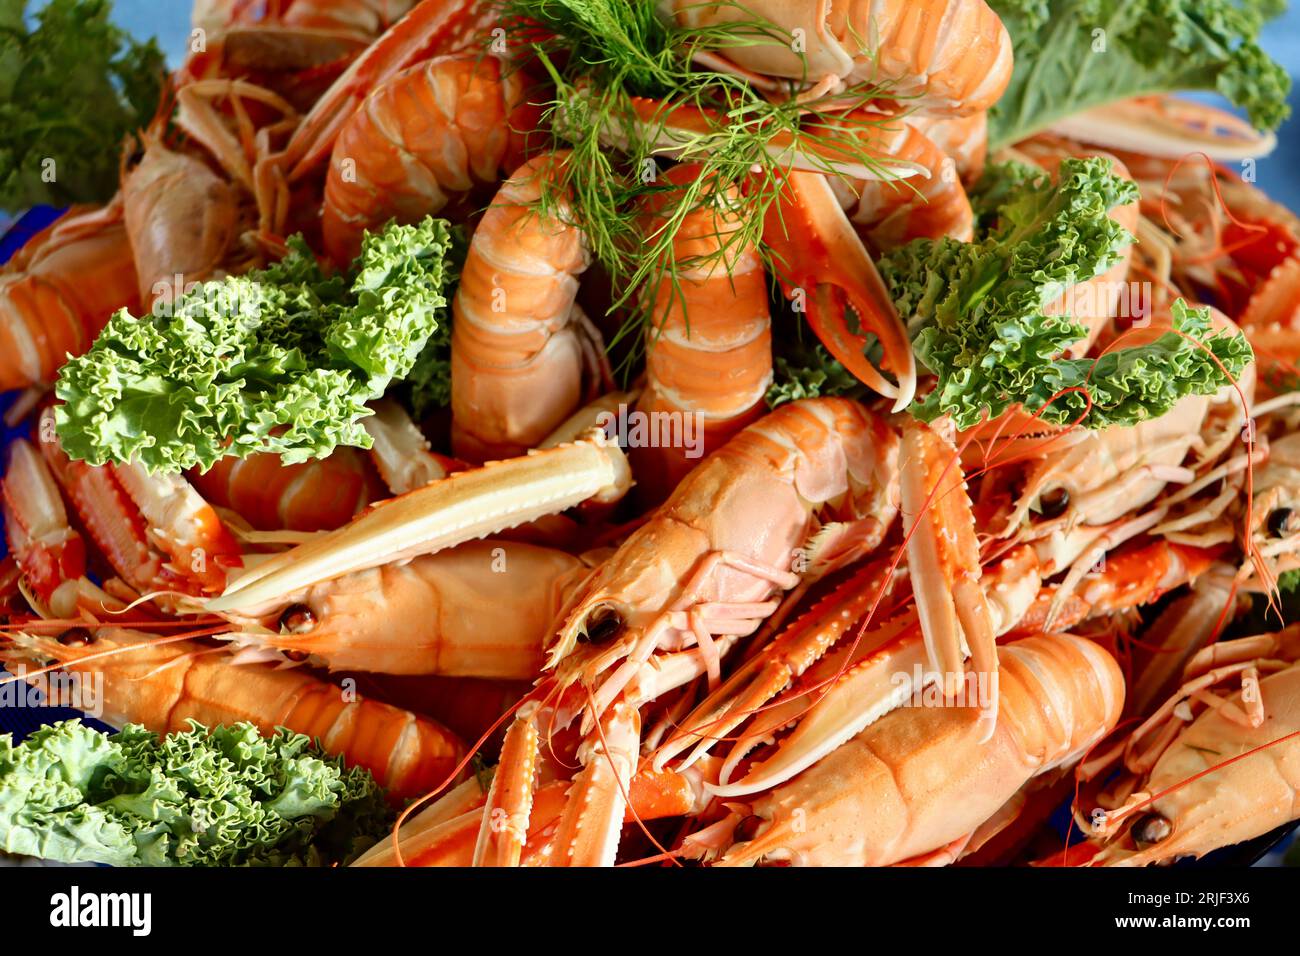 Cooked langoustines, Nephrops norvegicus, also called Norway lobsters (havskräfta in Swedish) ready to eat on dinner table in Sweden. Stock Photo